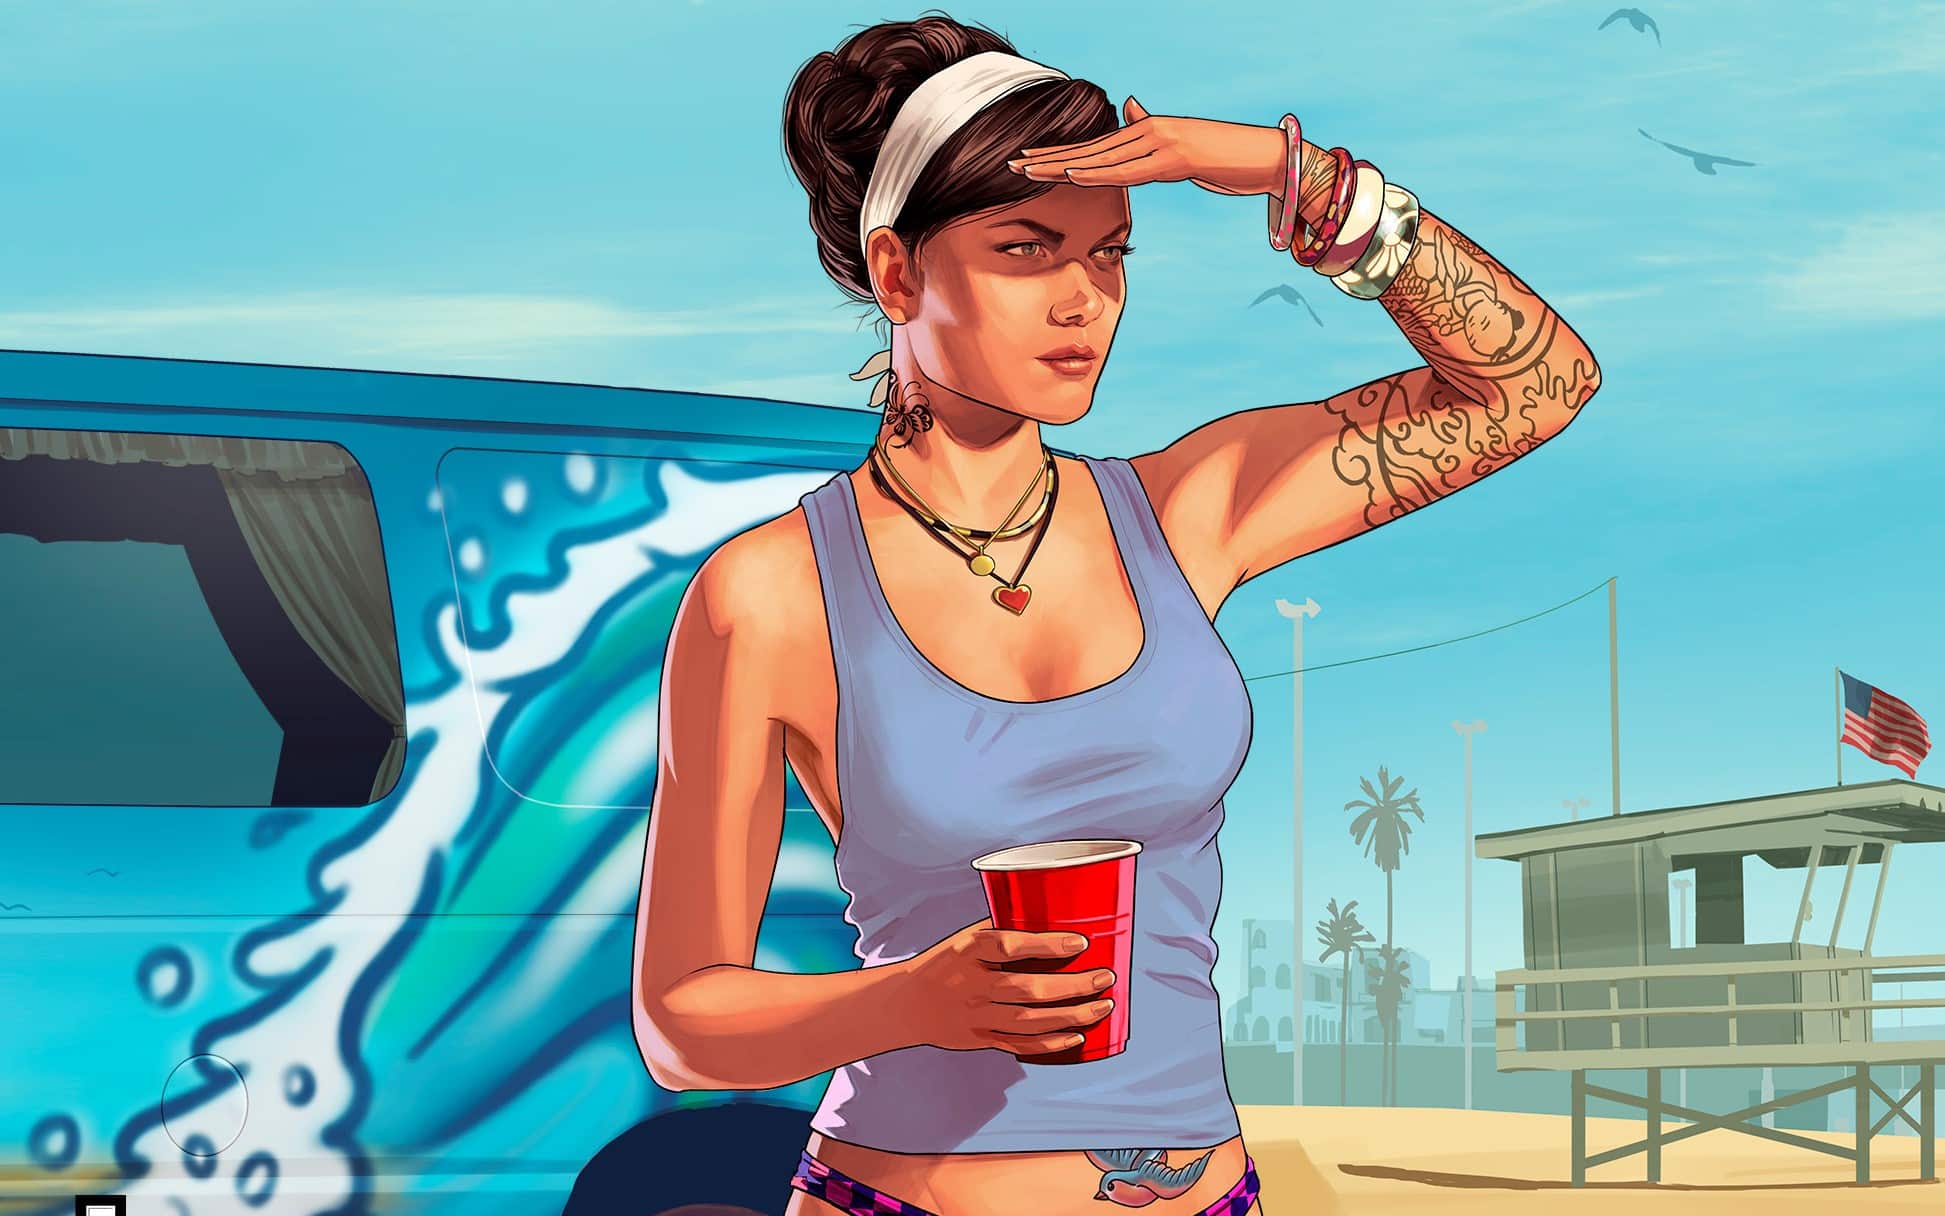 GTA 6 gameplay videos and screenshots leaked, come check it out early